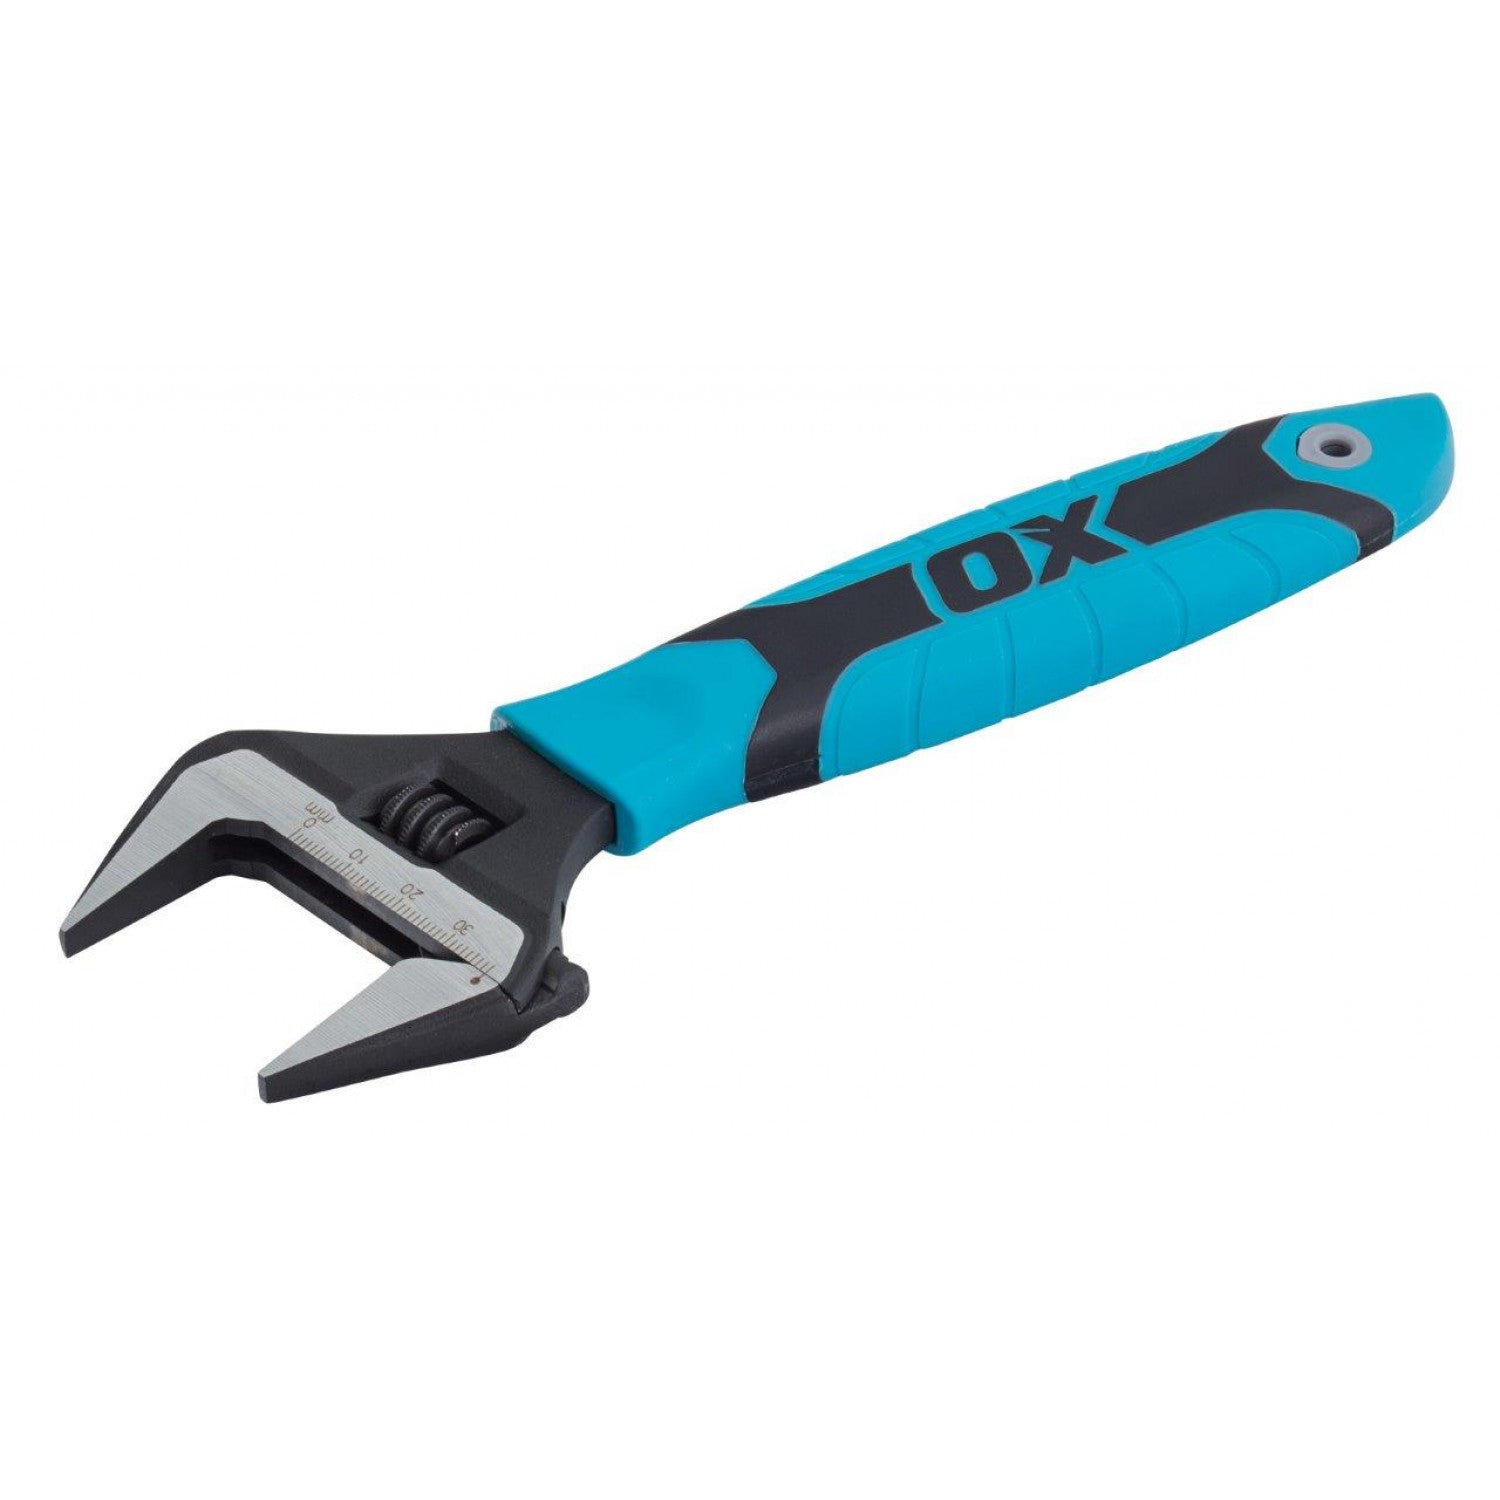 OX Tools P324608 Pro Adjustable Wrench Extra Wide Jaw 200mm/8